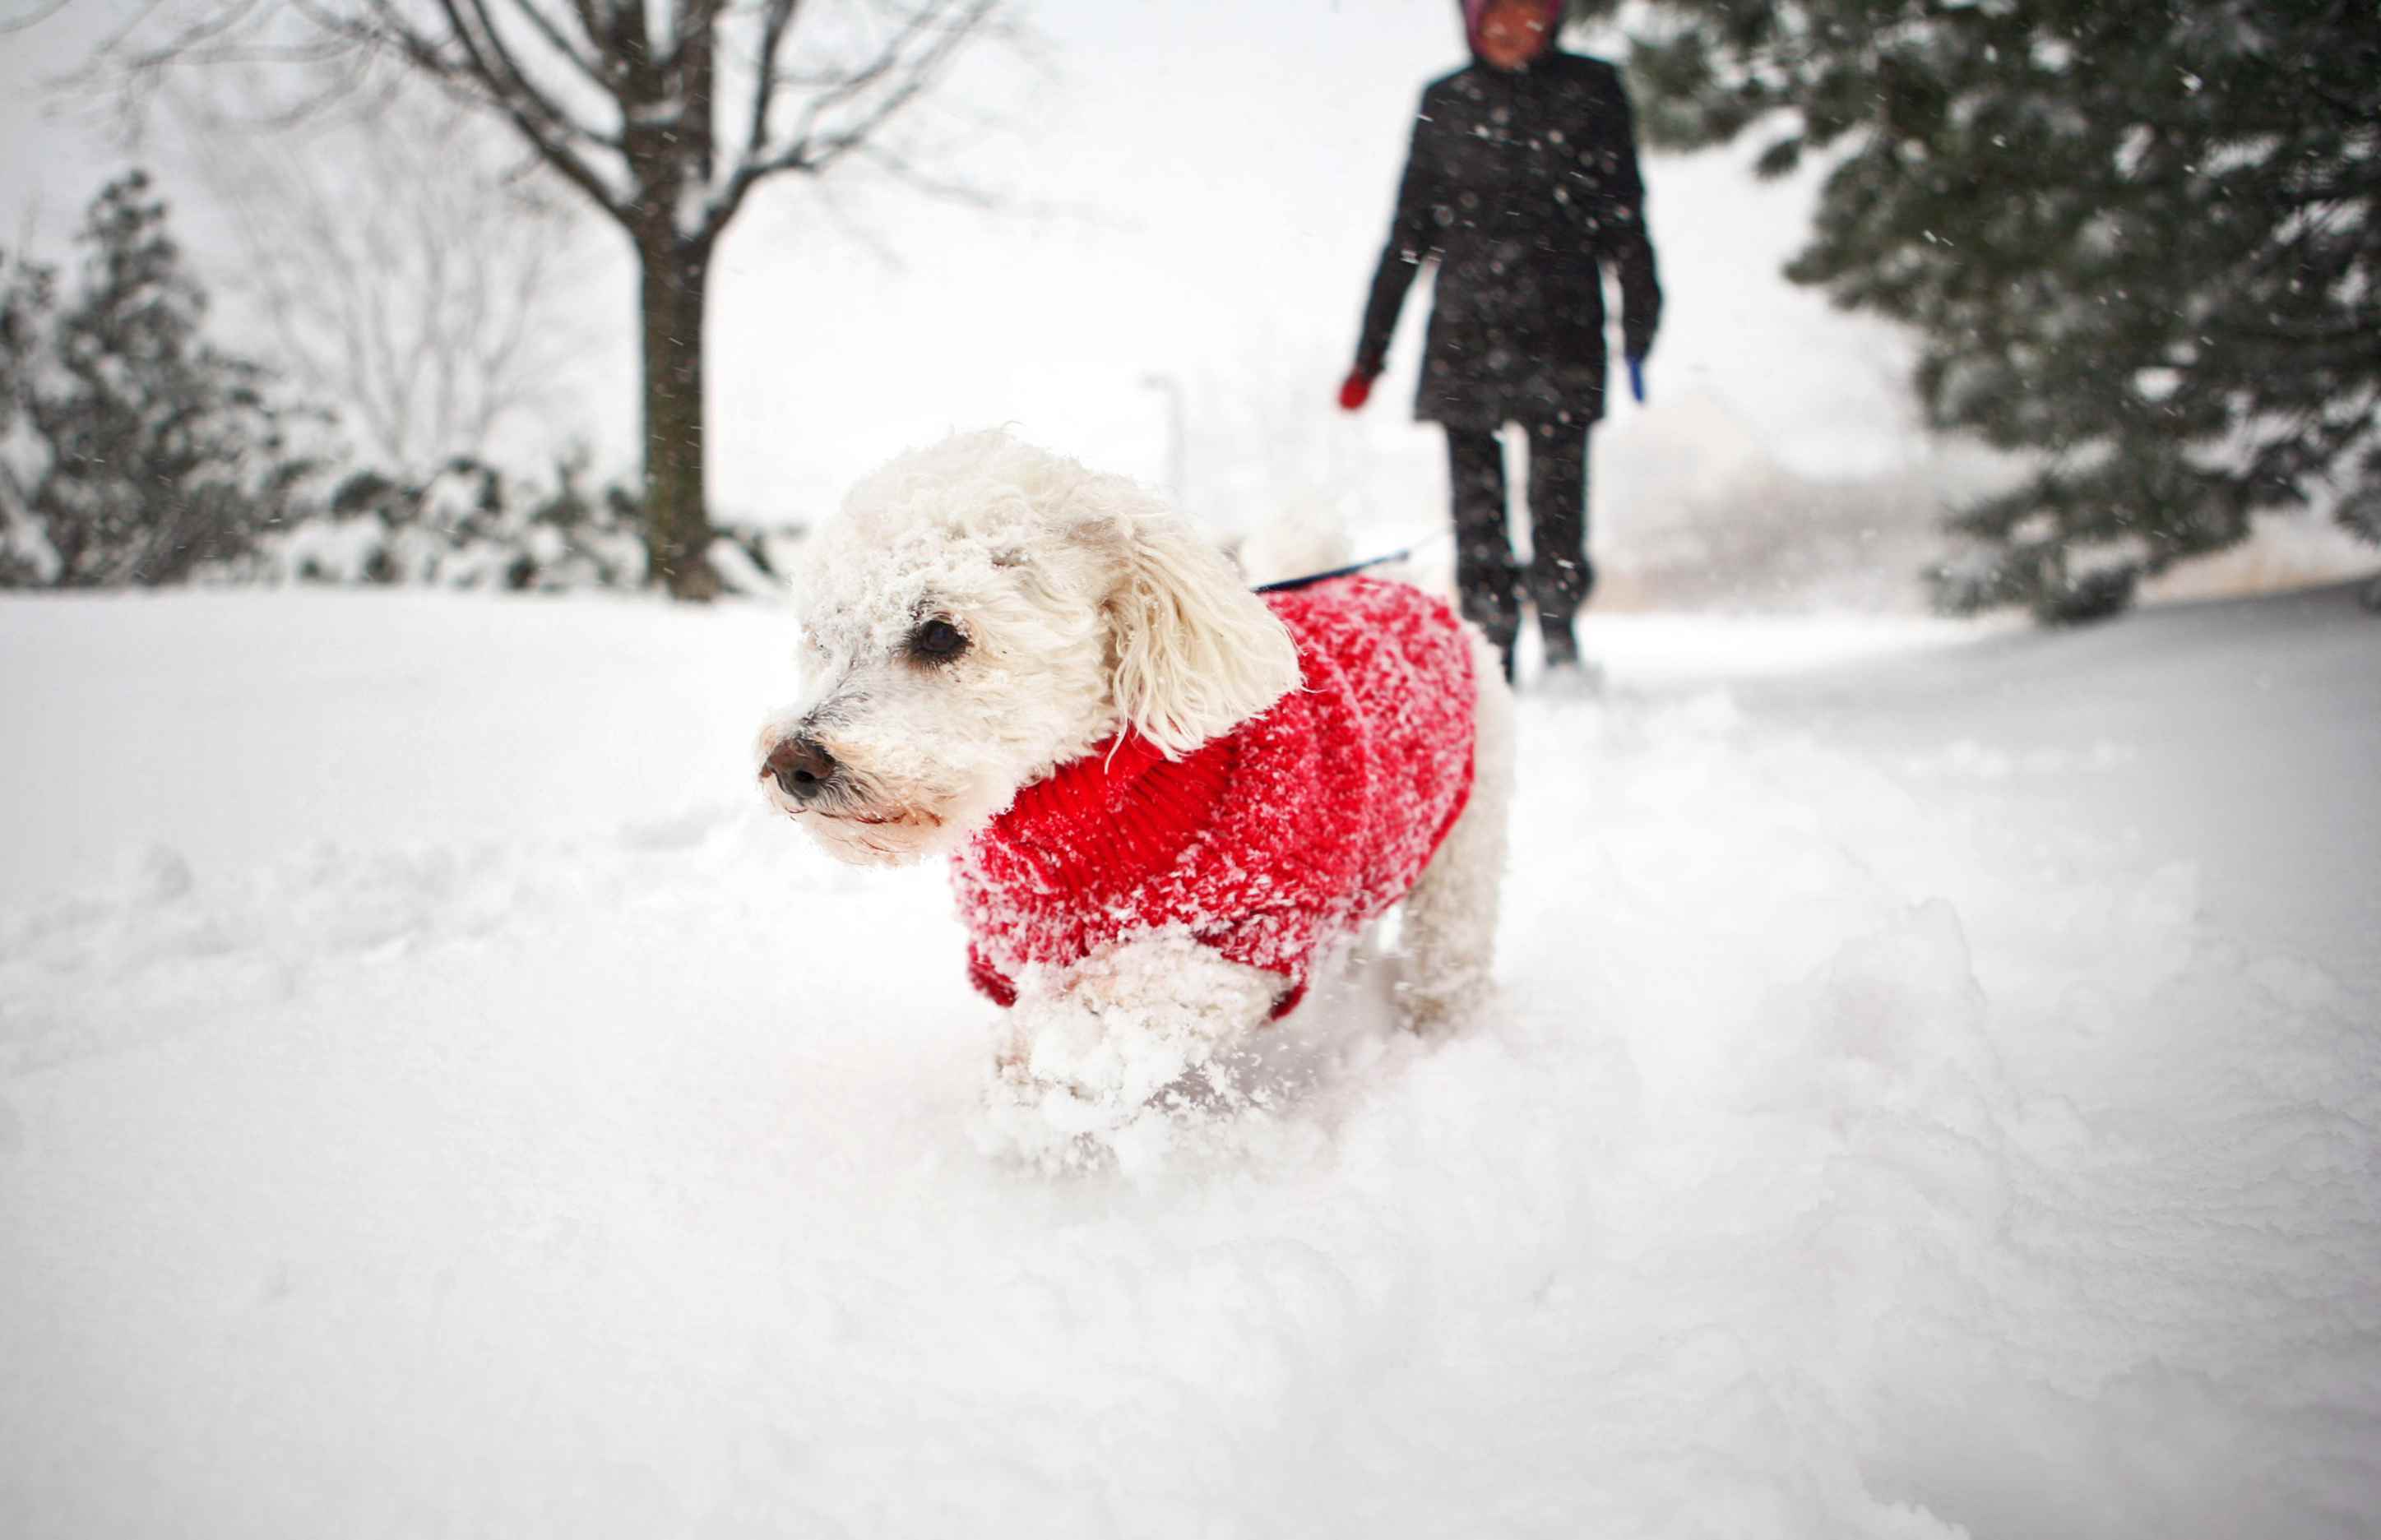 Dog wearing a red snow sweater outside in the snow with its owner behind.